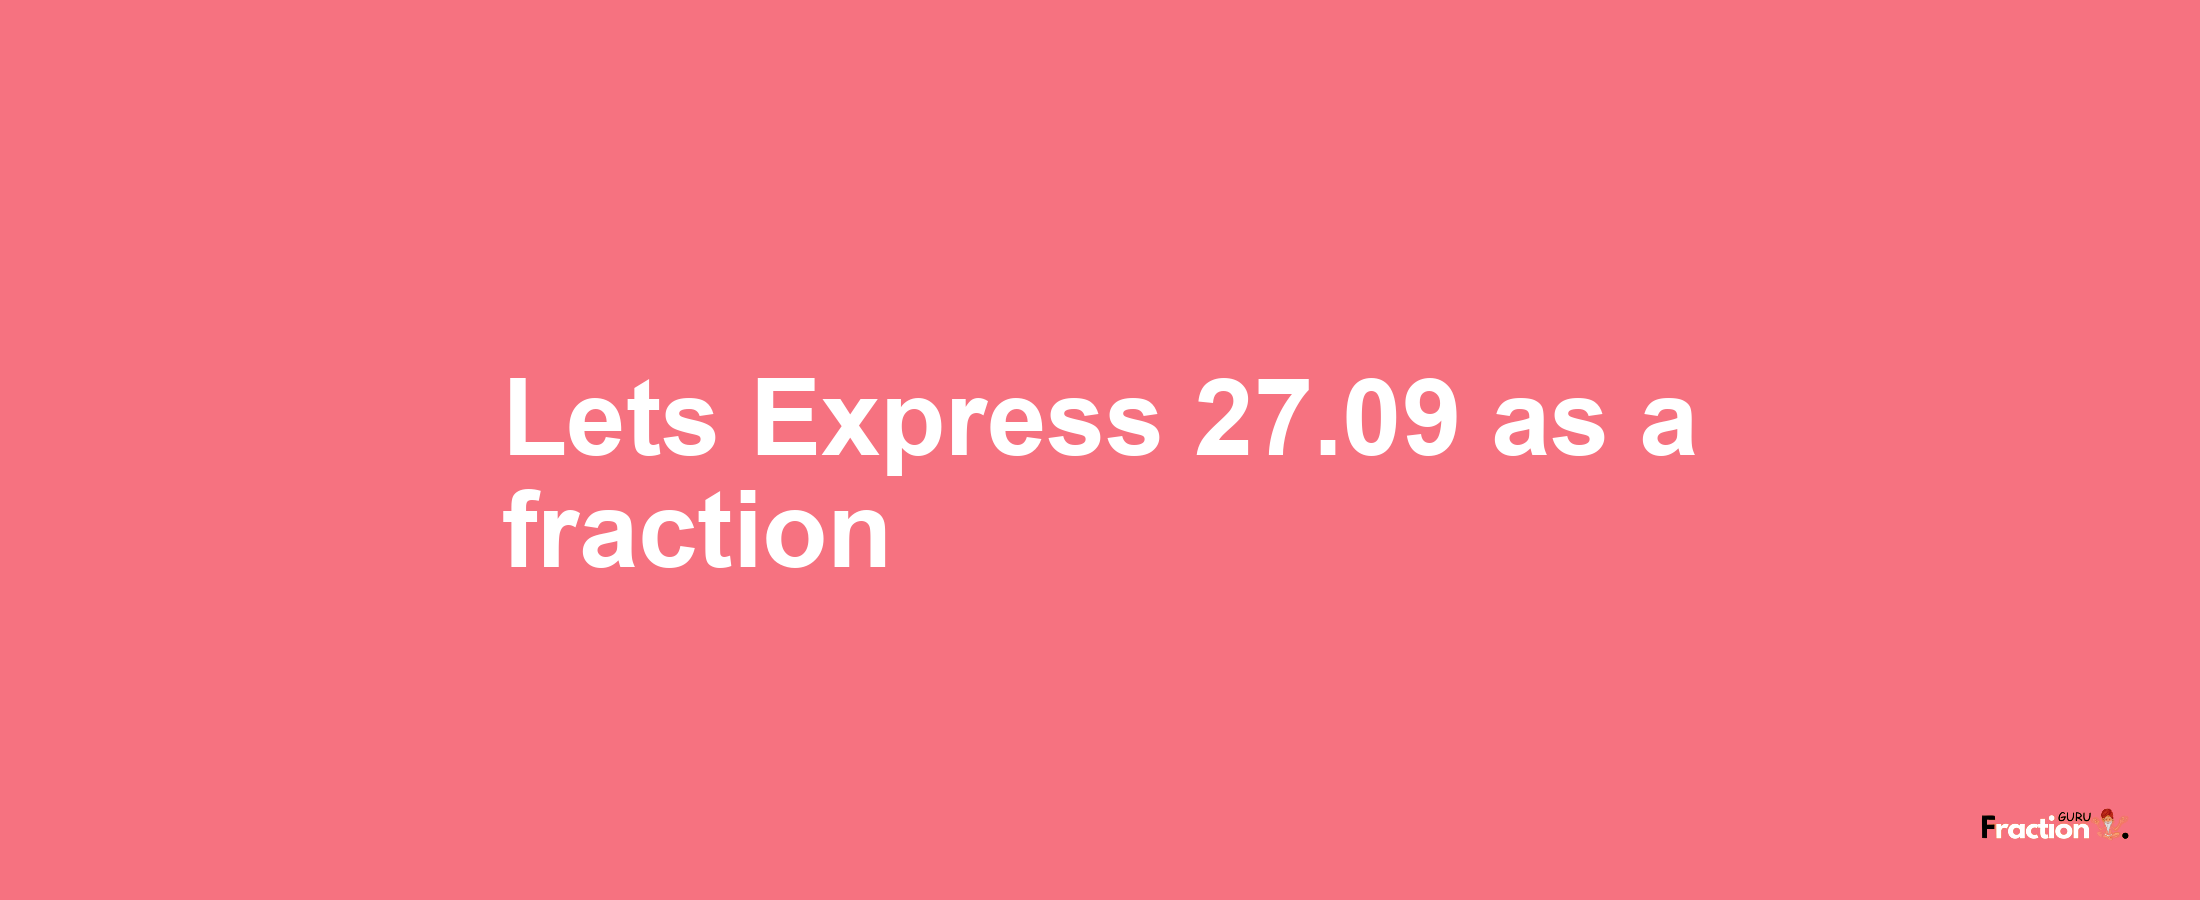 Lets Express 27.09 as afraction